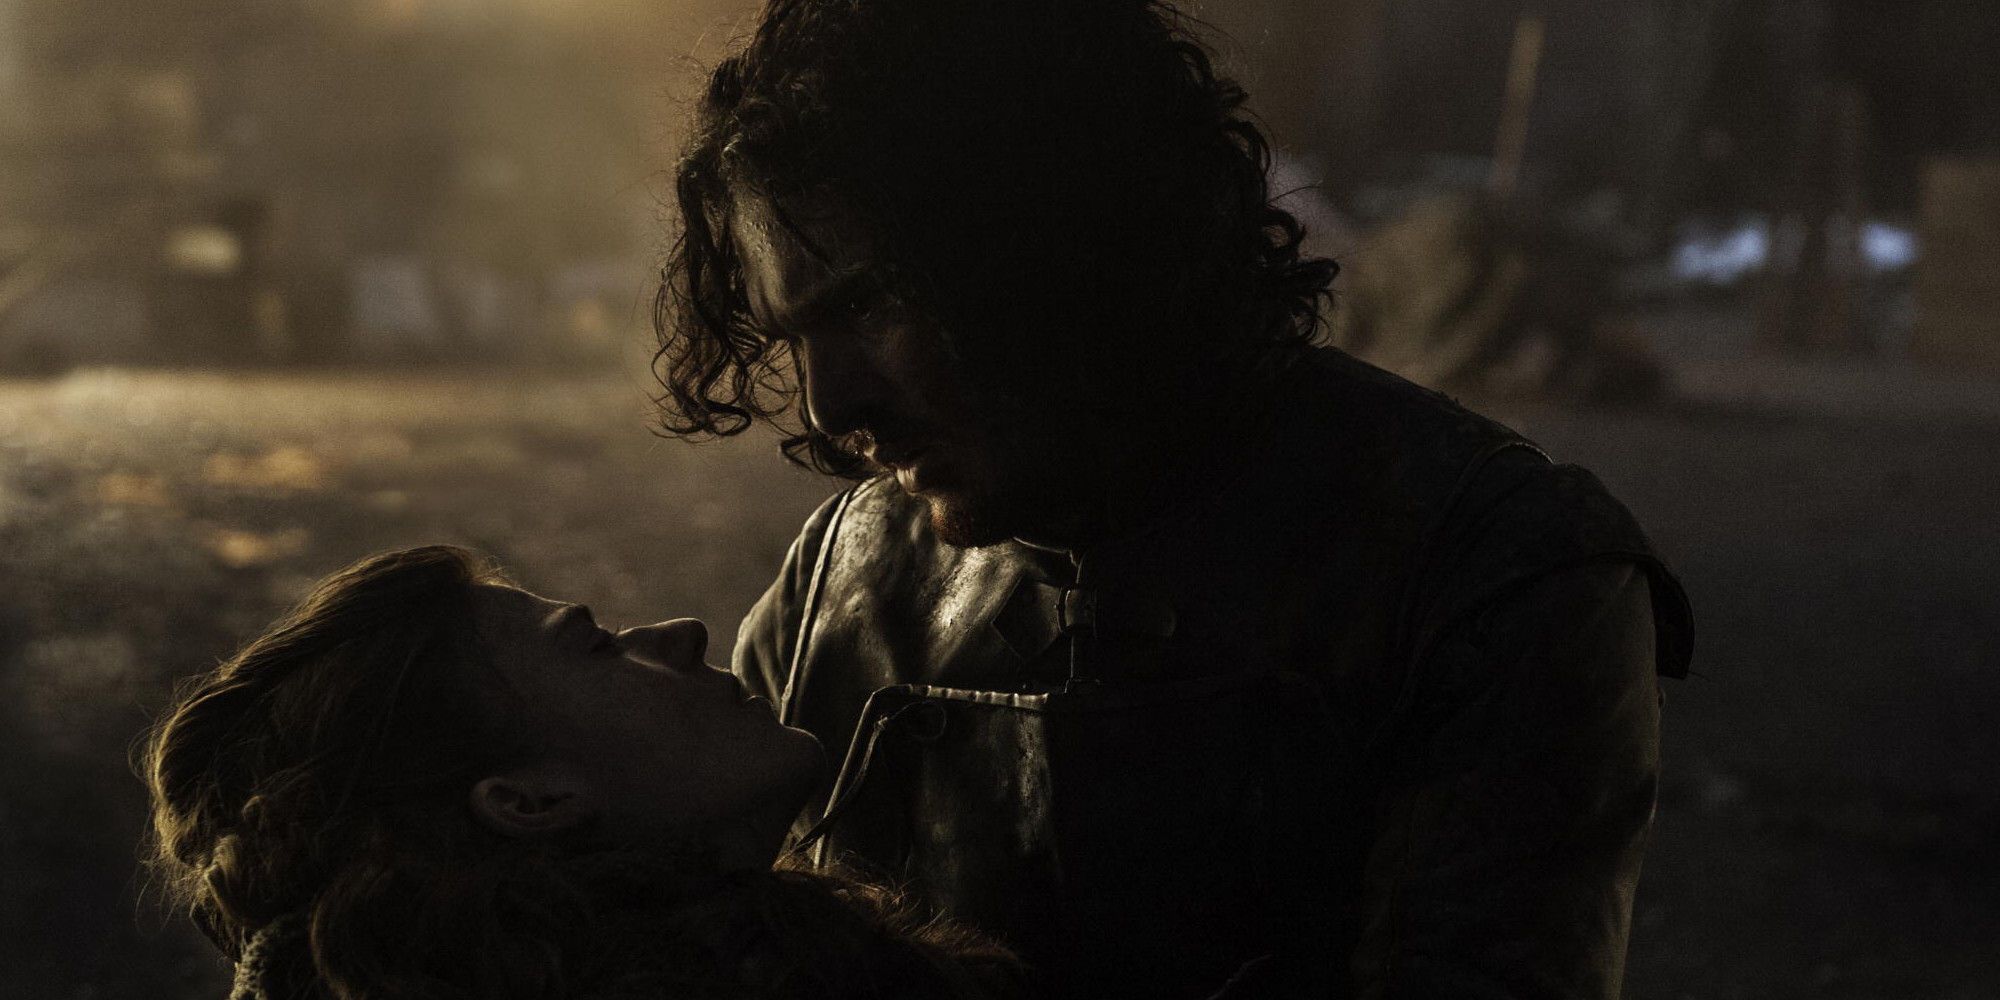 Jon Cradles Dying Ygritte in Game of Thrones